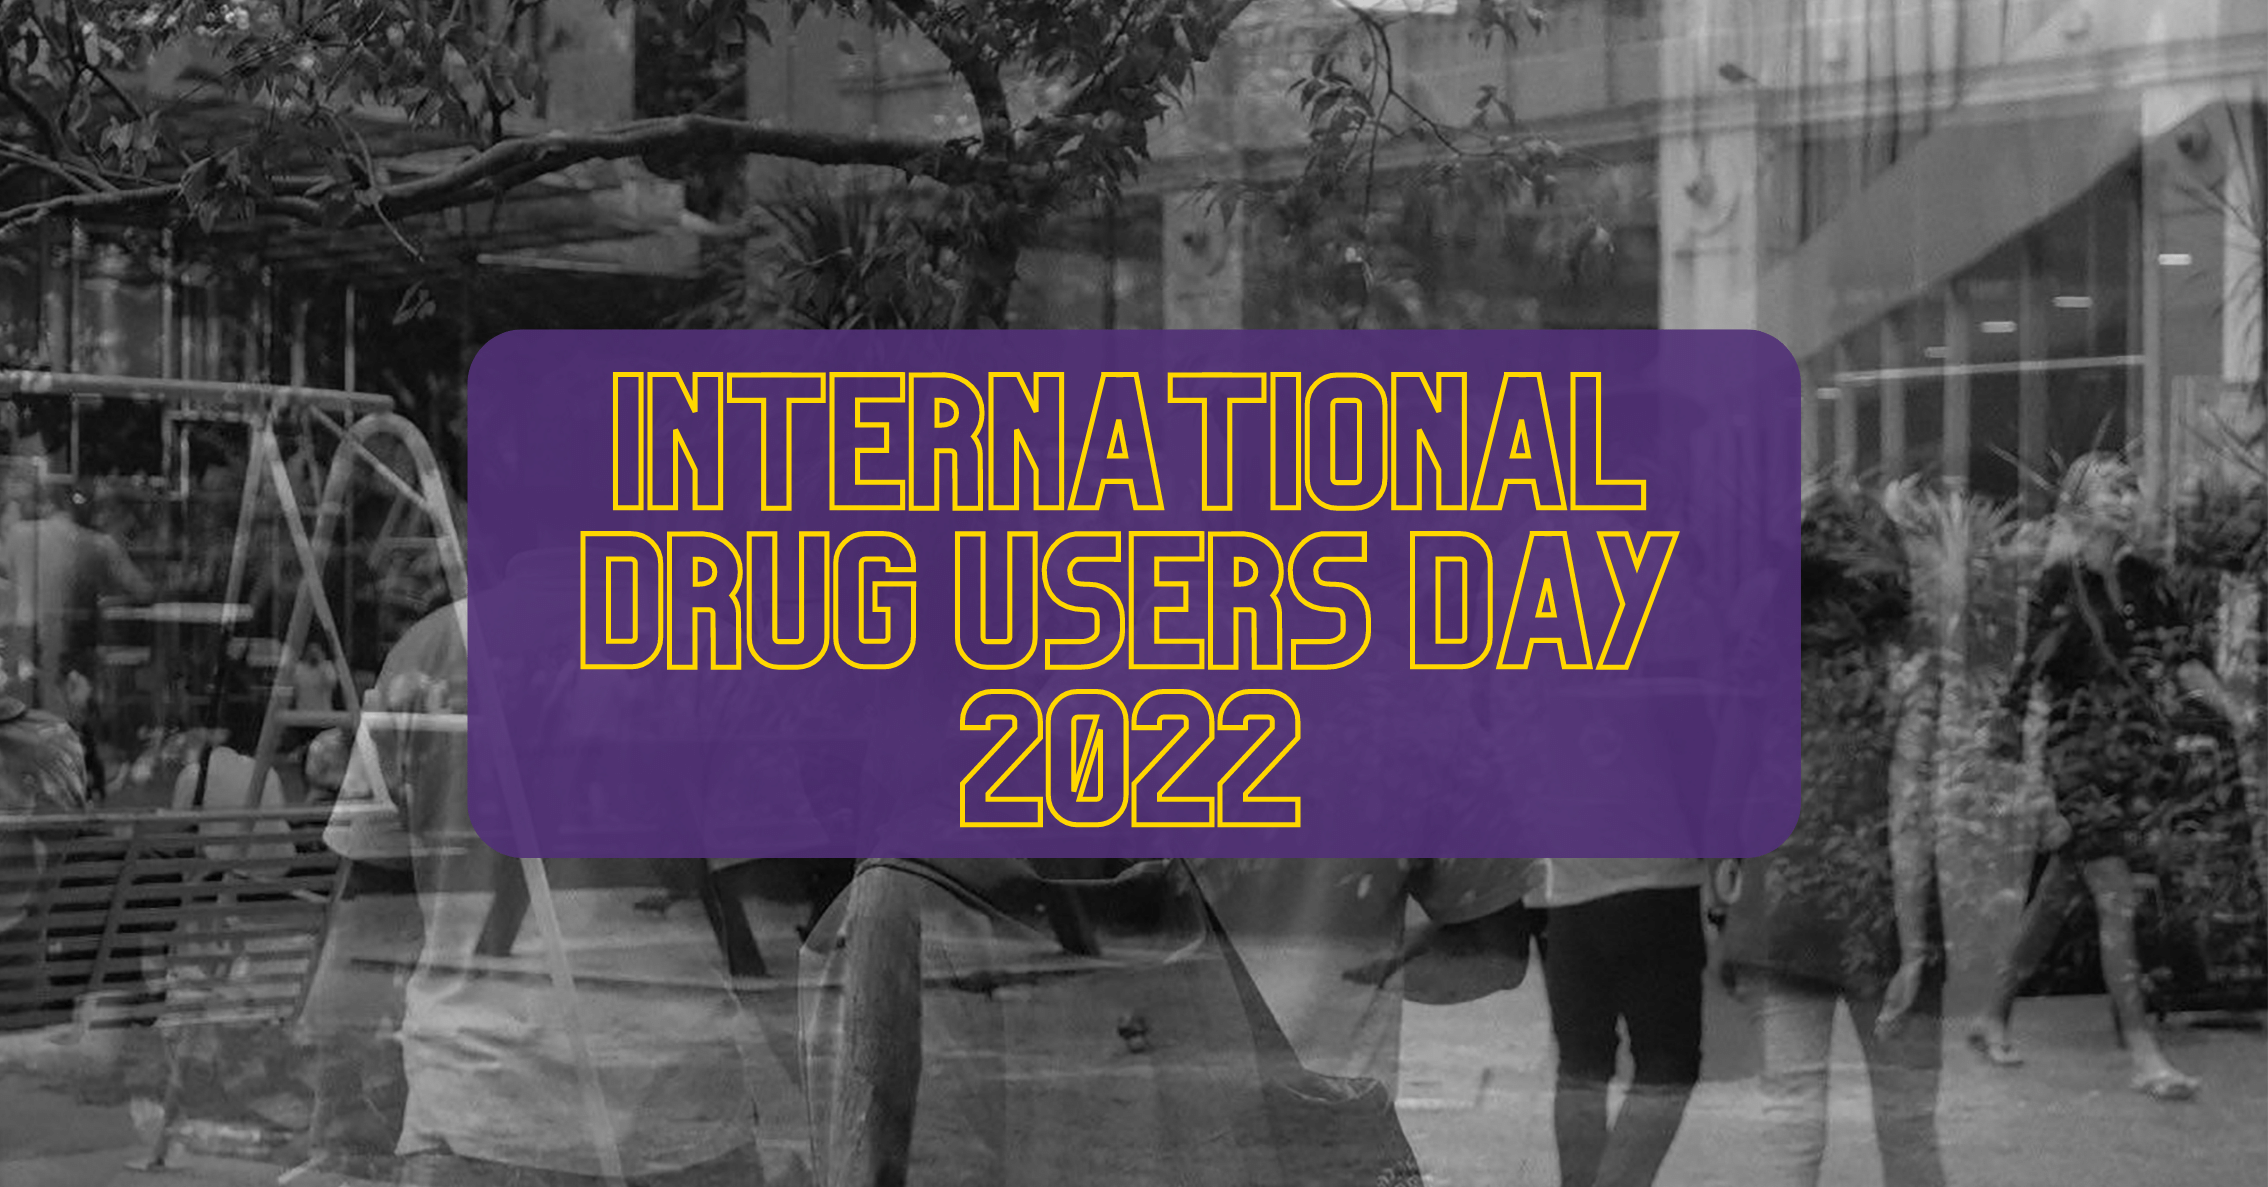 Featured image for “International Drug Users Day 2022”